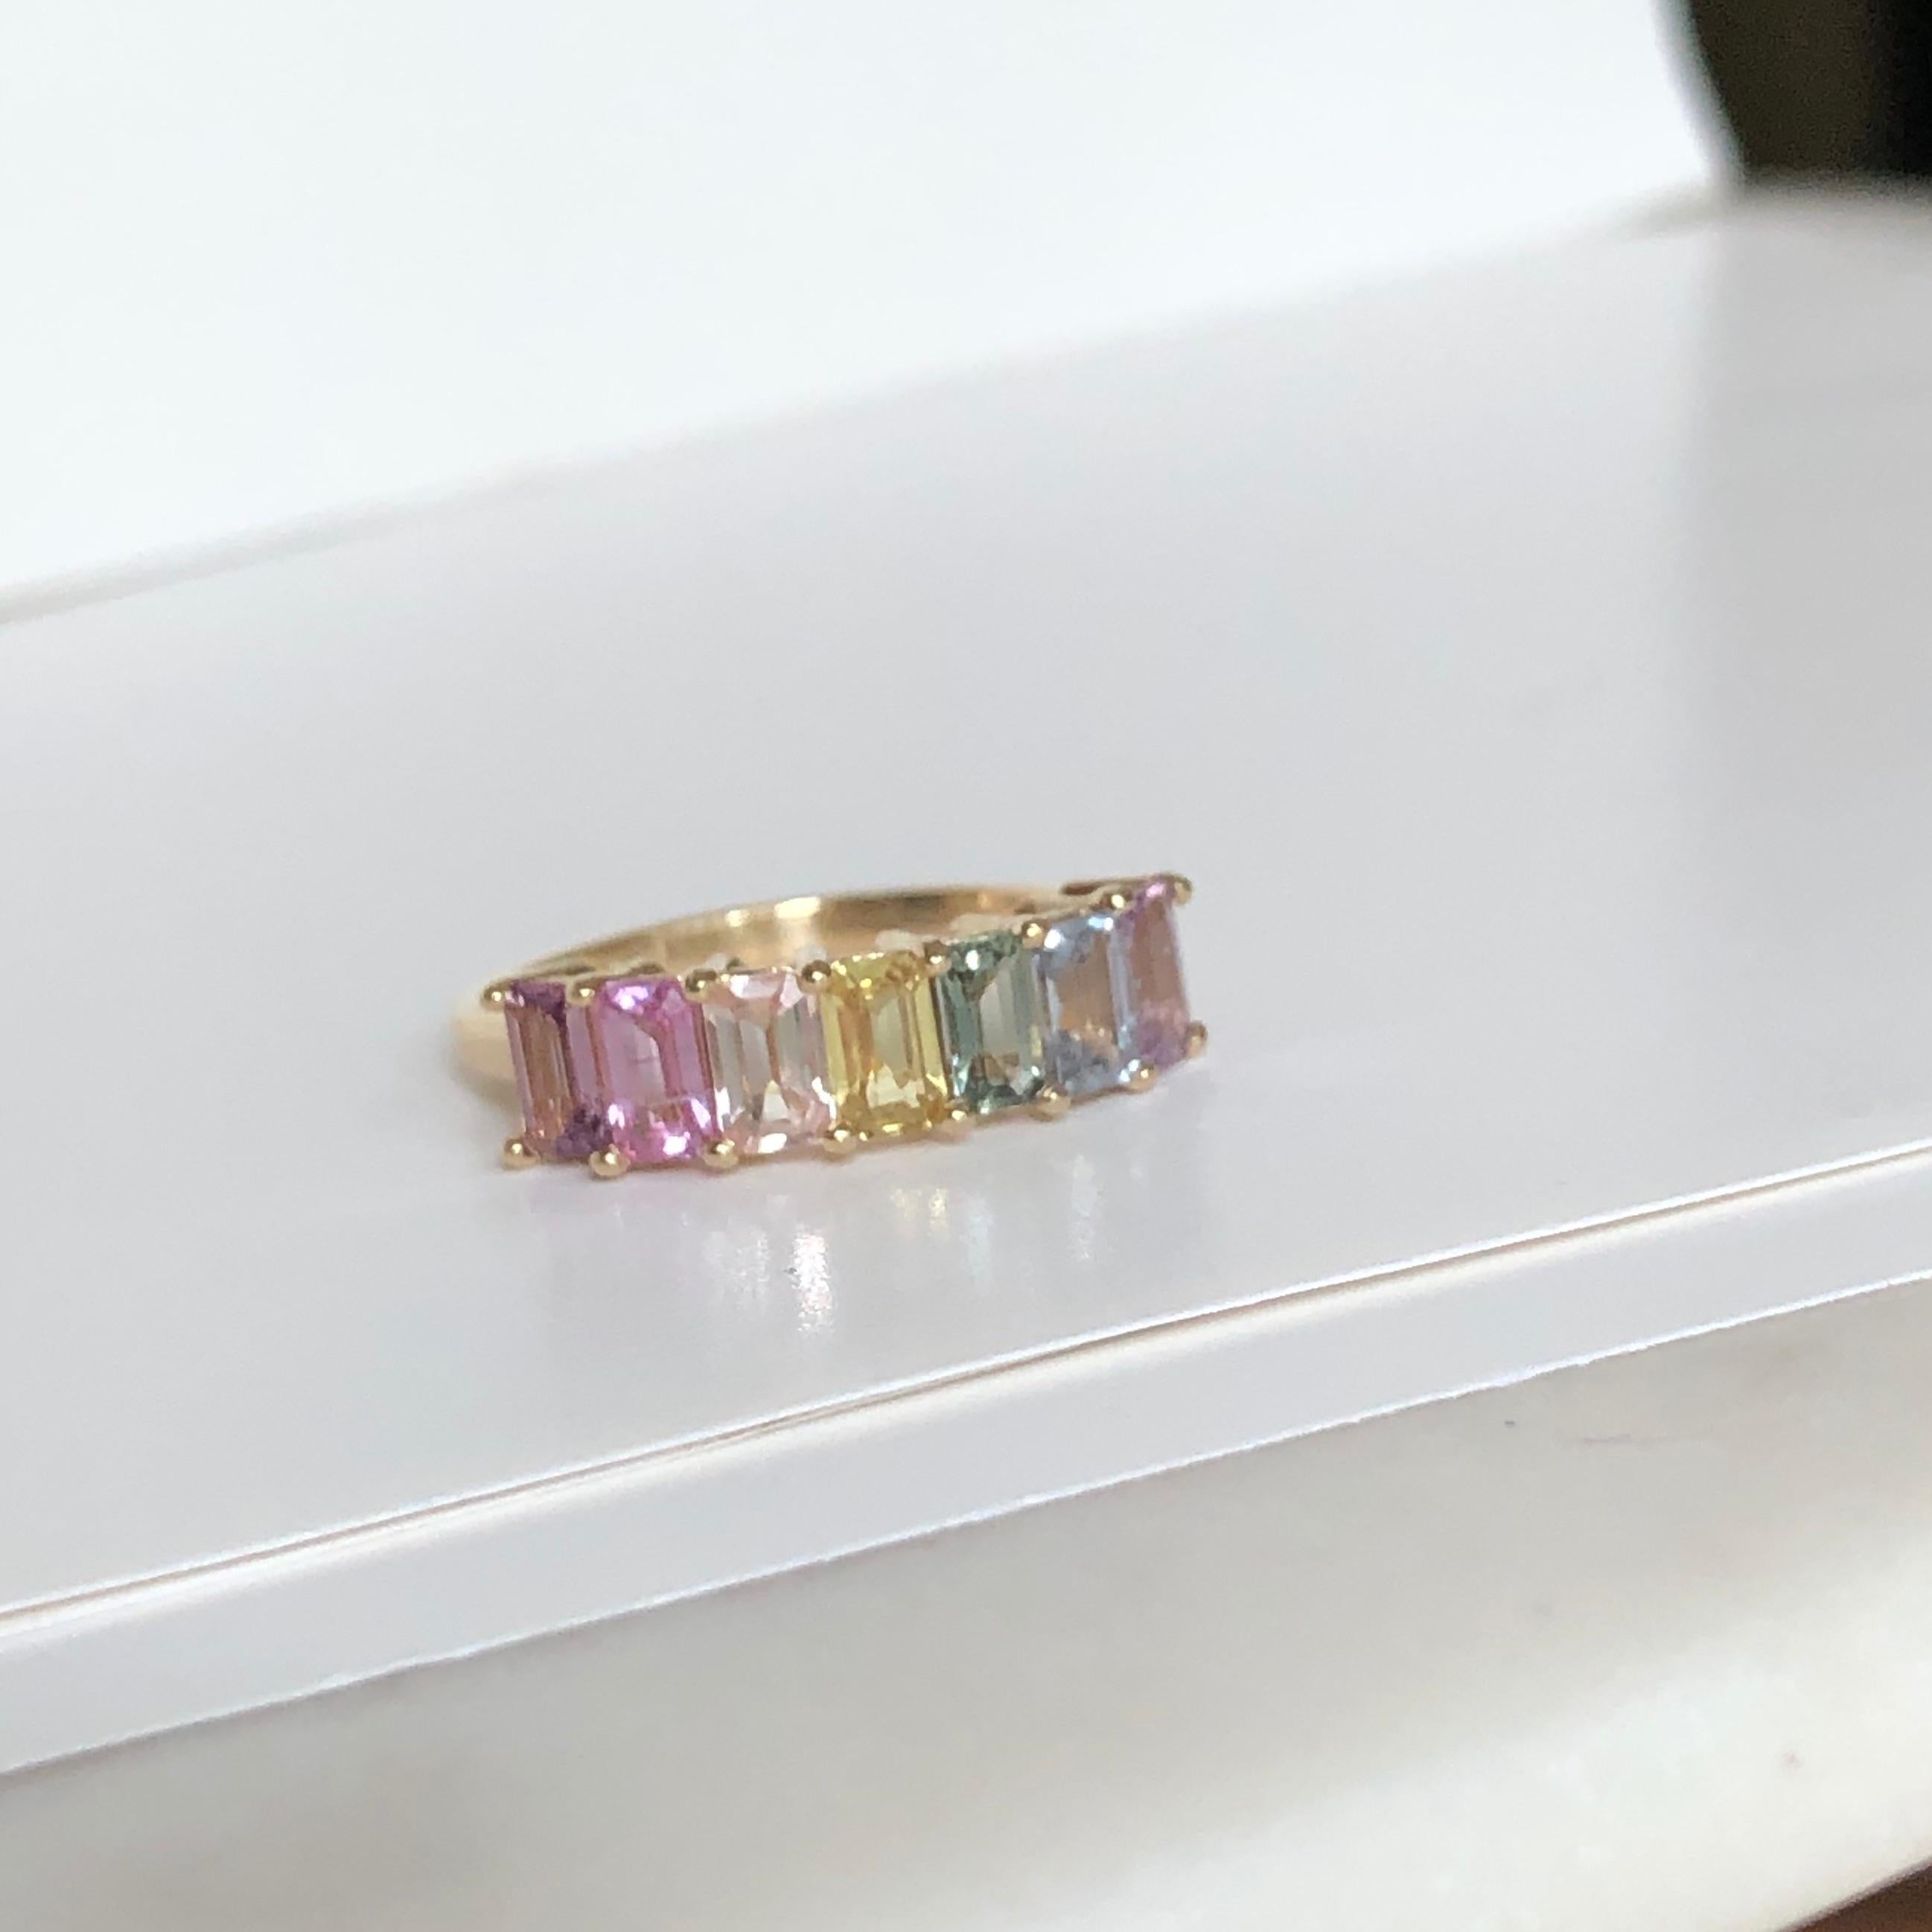 This Graduating Rainbow 100% natural-untreated Sapphire Half Eternity Engagement Band 14K yellow gold ring is a beautiful piece to add to your collection. Set with 7 emerald cut natural, no heat rainbow multi-color sapphires weighing 2.44 carats,